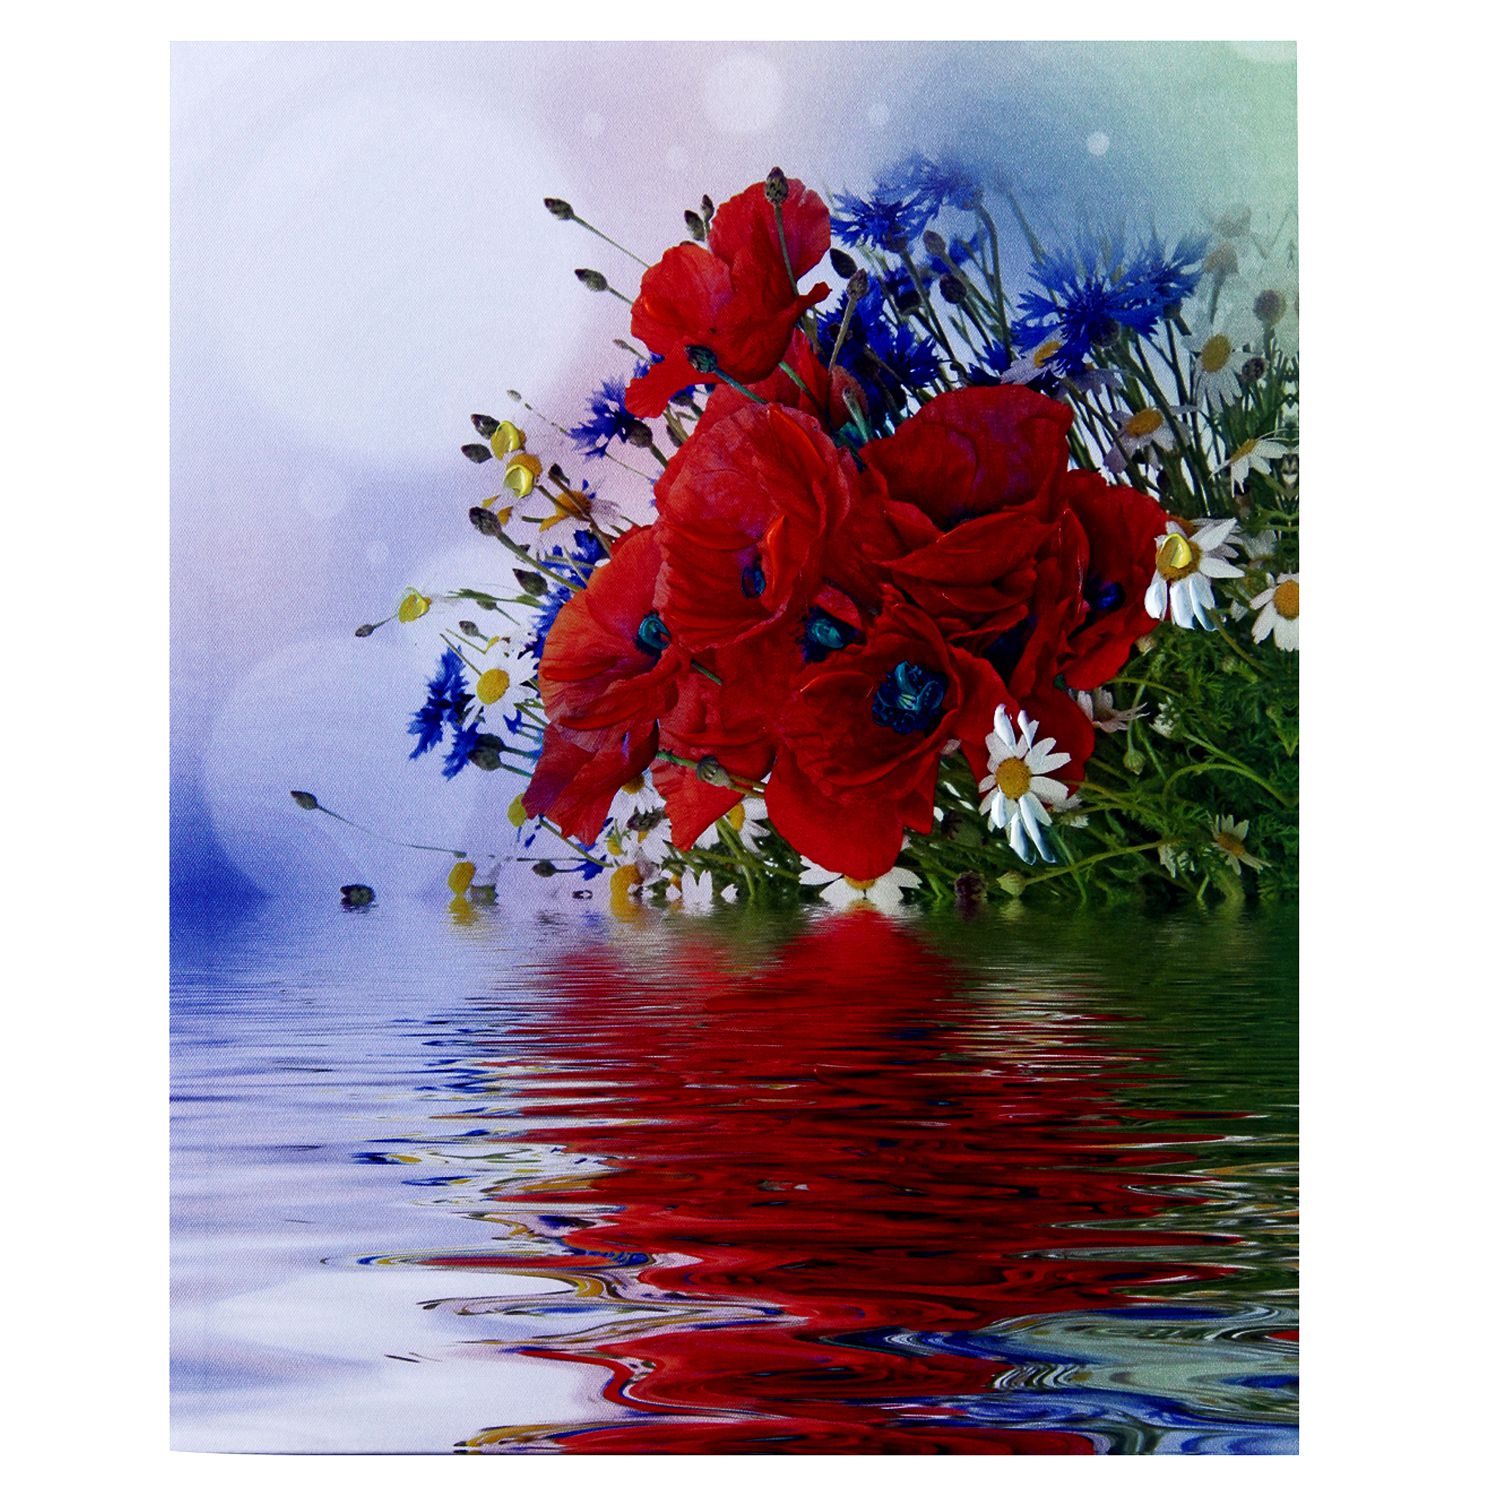 Tayhaa Beautiful Paintings Canvas Painting Without Frame Buy Tayhaa Beautiful Paintings Canvas Painting Without Frame At Best Price In India On Snapdeal